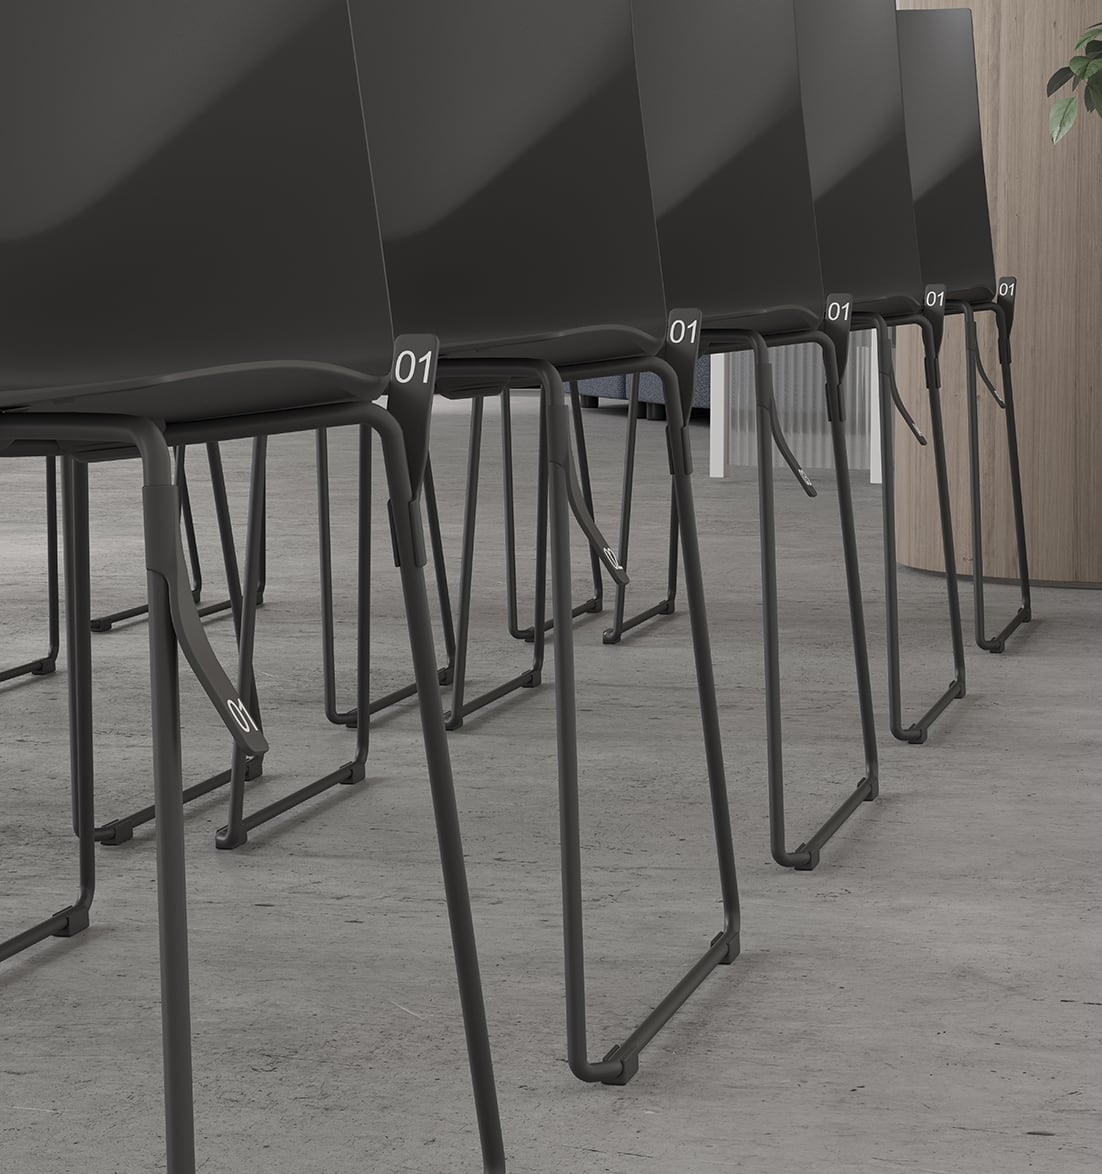 A row of black chairs in a conference room.